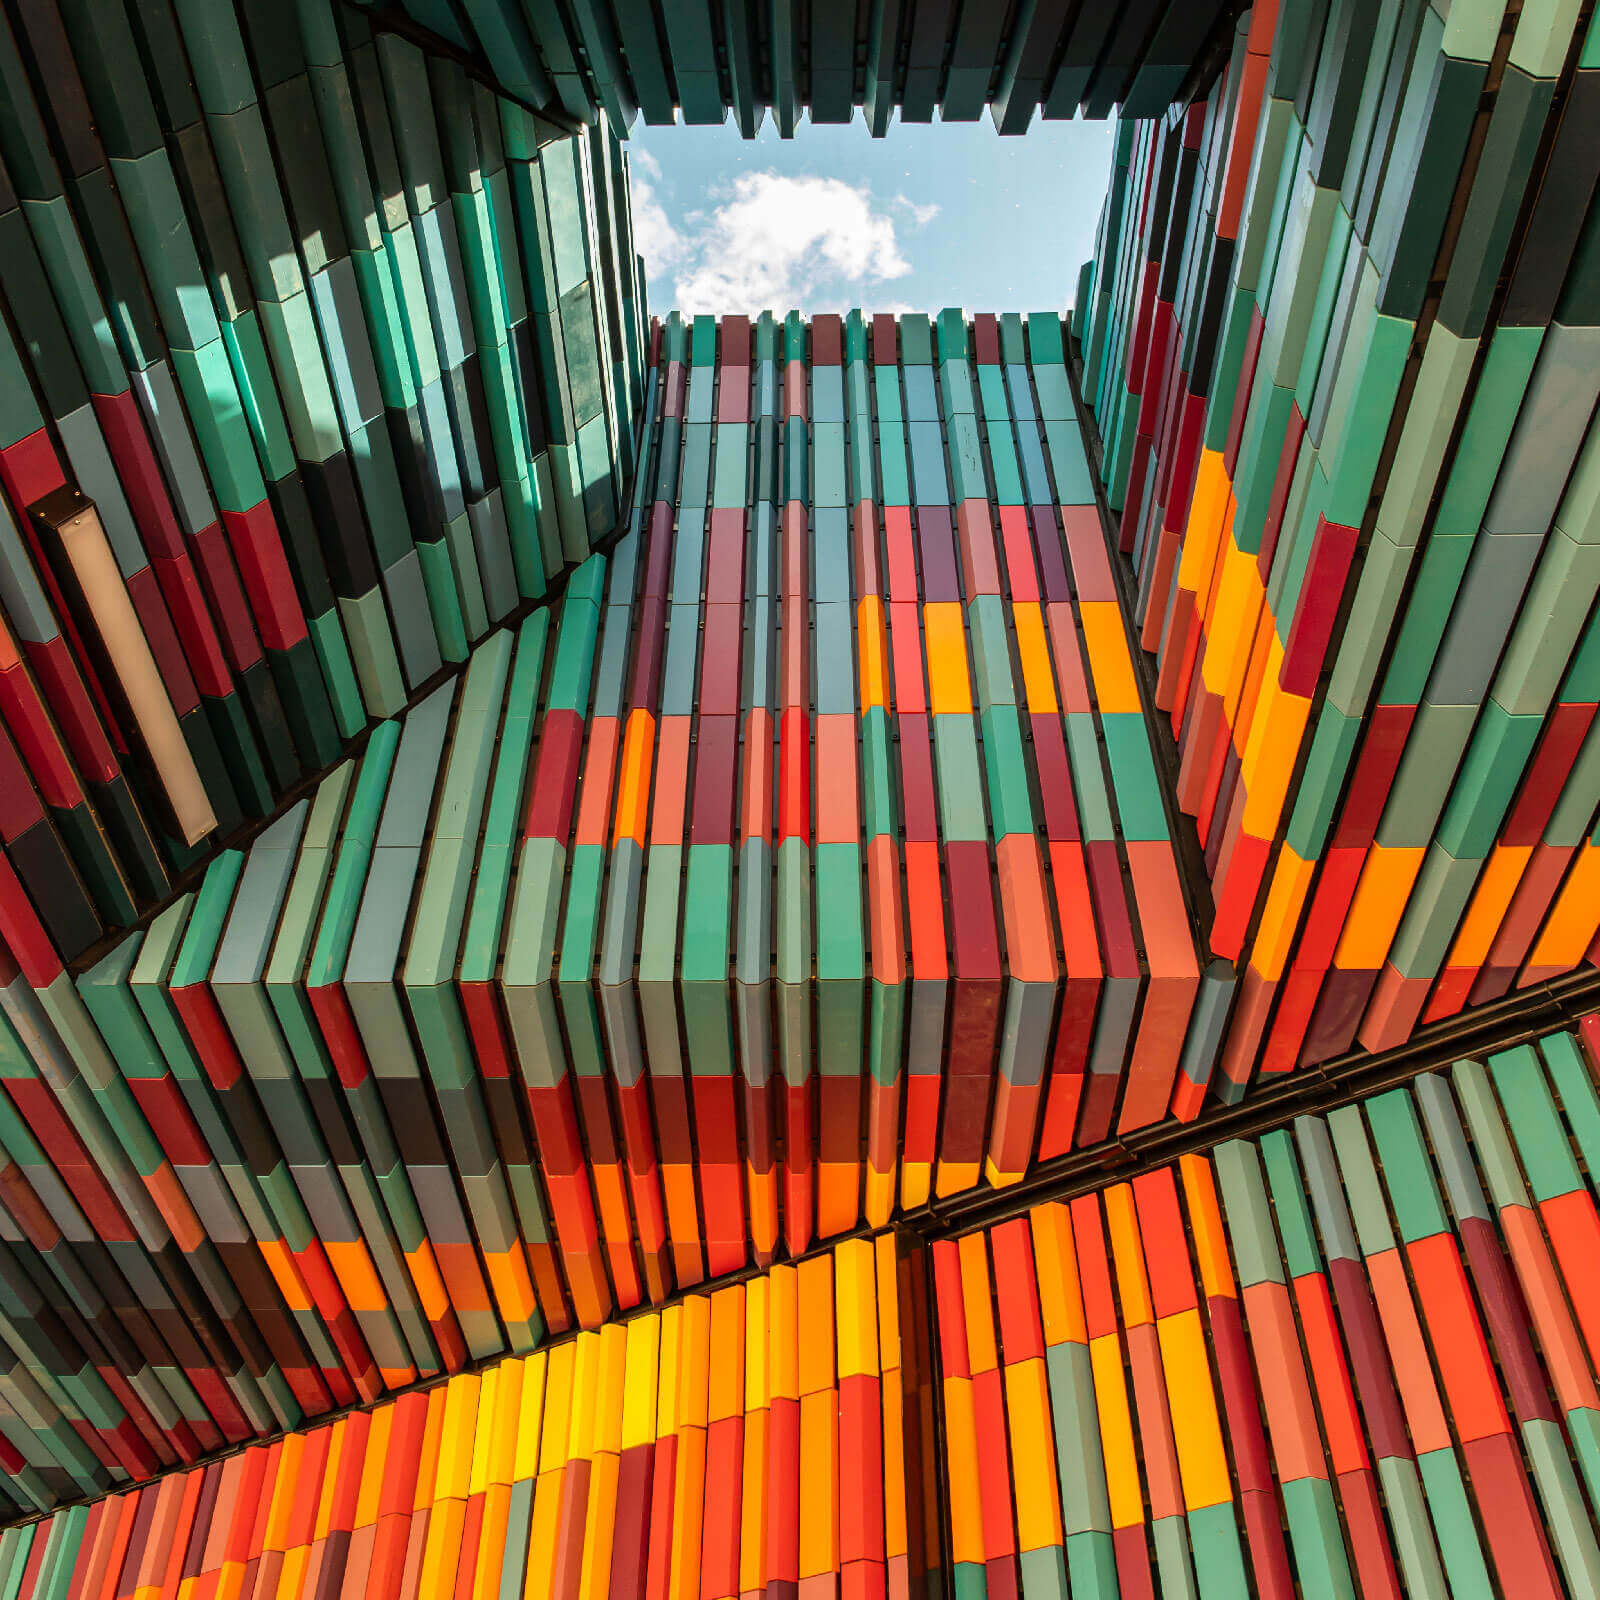 Colourful abstract architecture with a glimpse of the sky